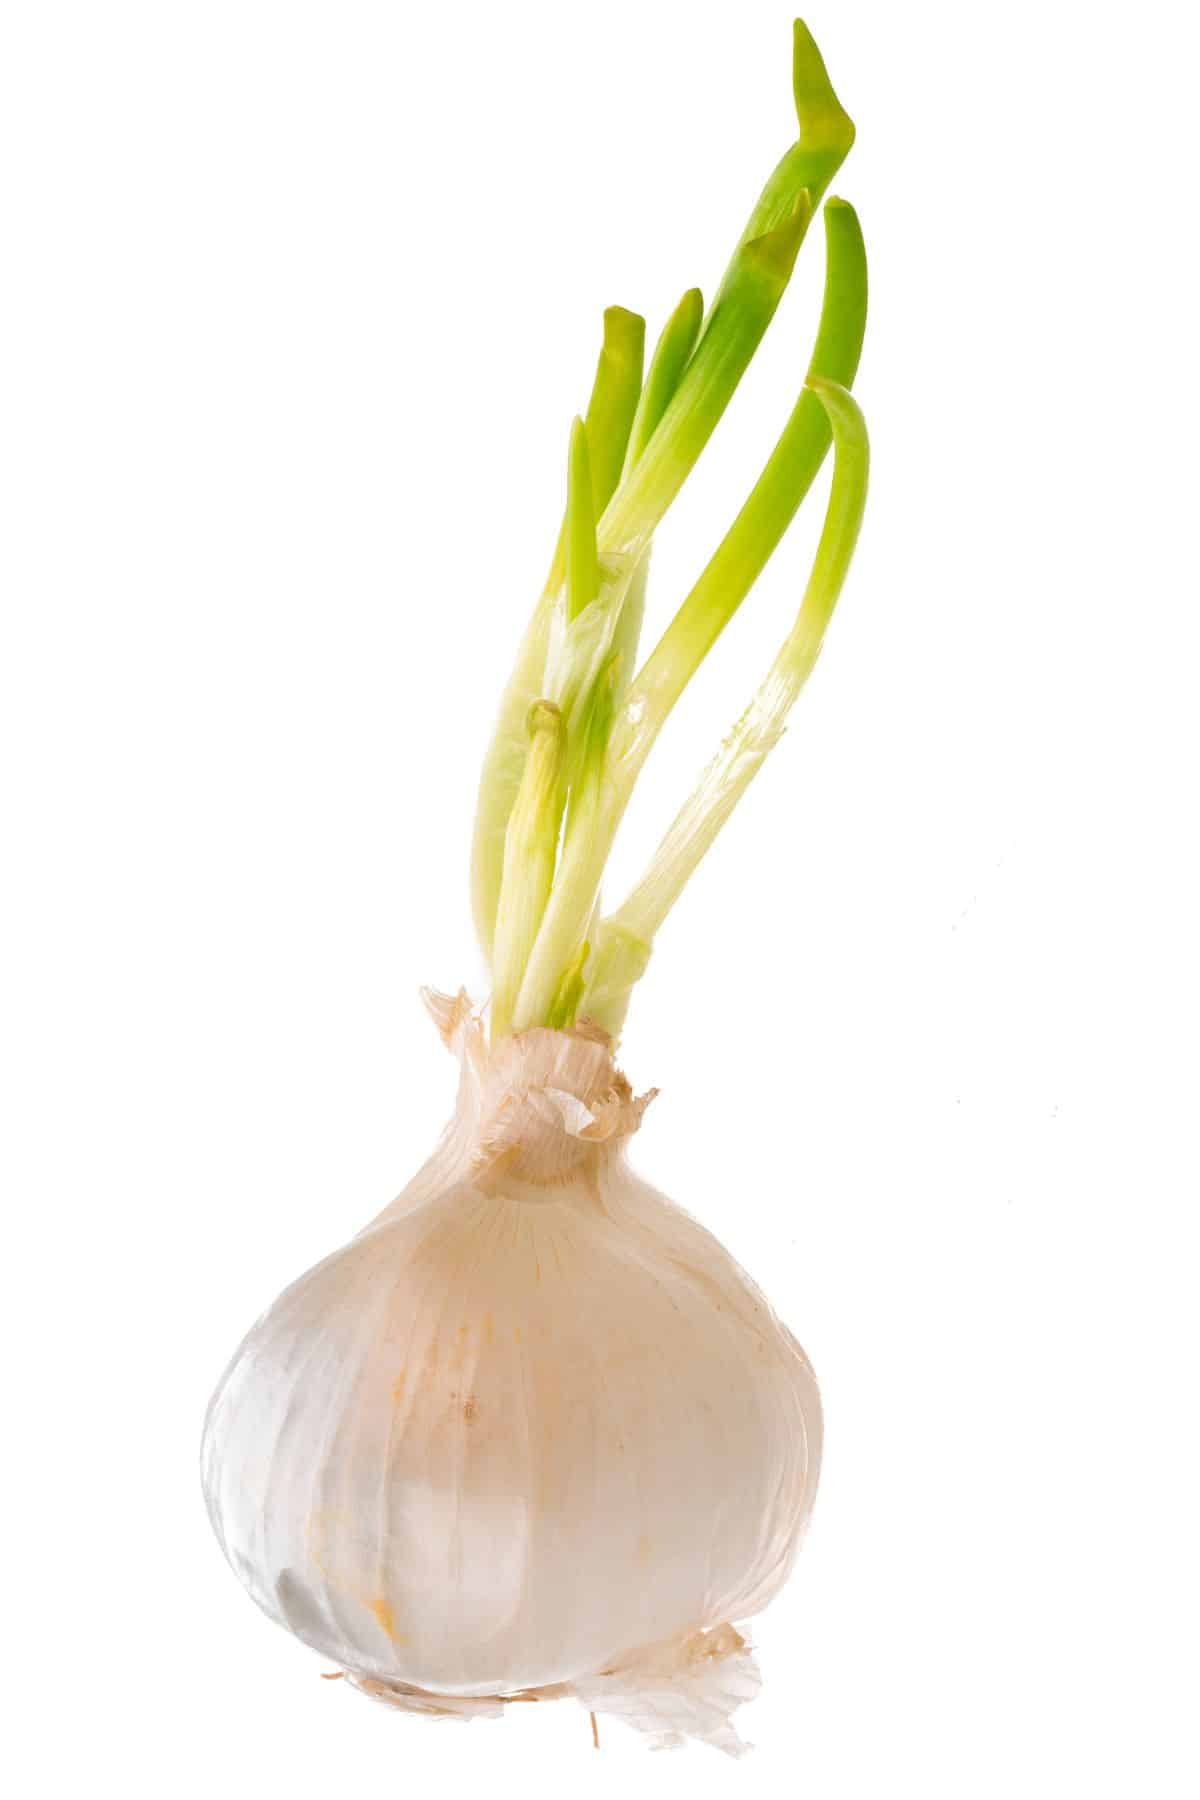 White onion with green stalk growing out.